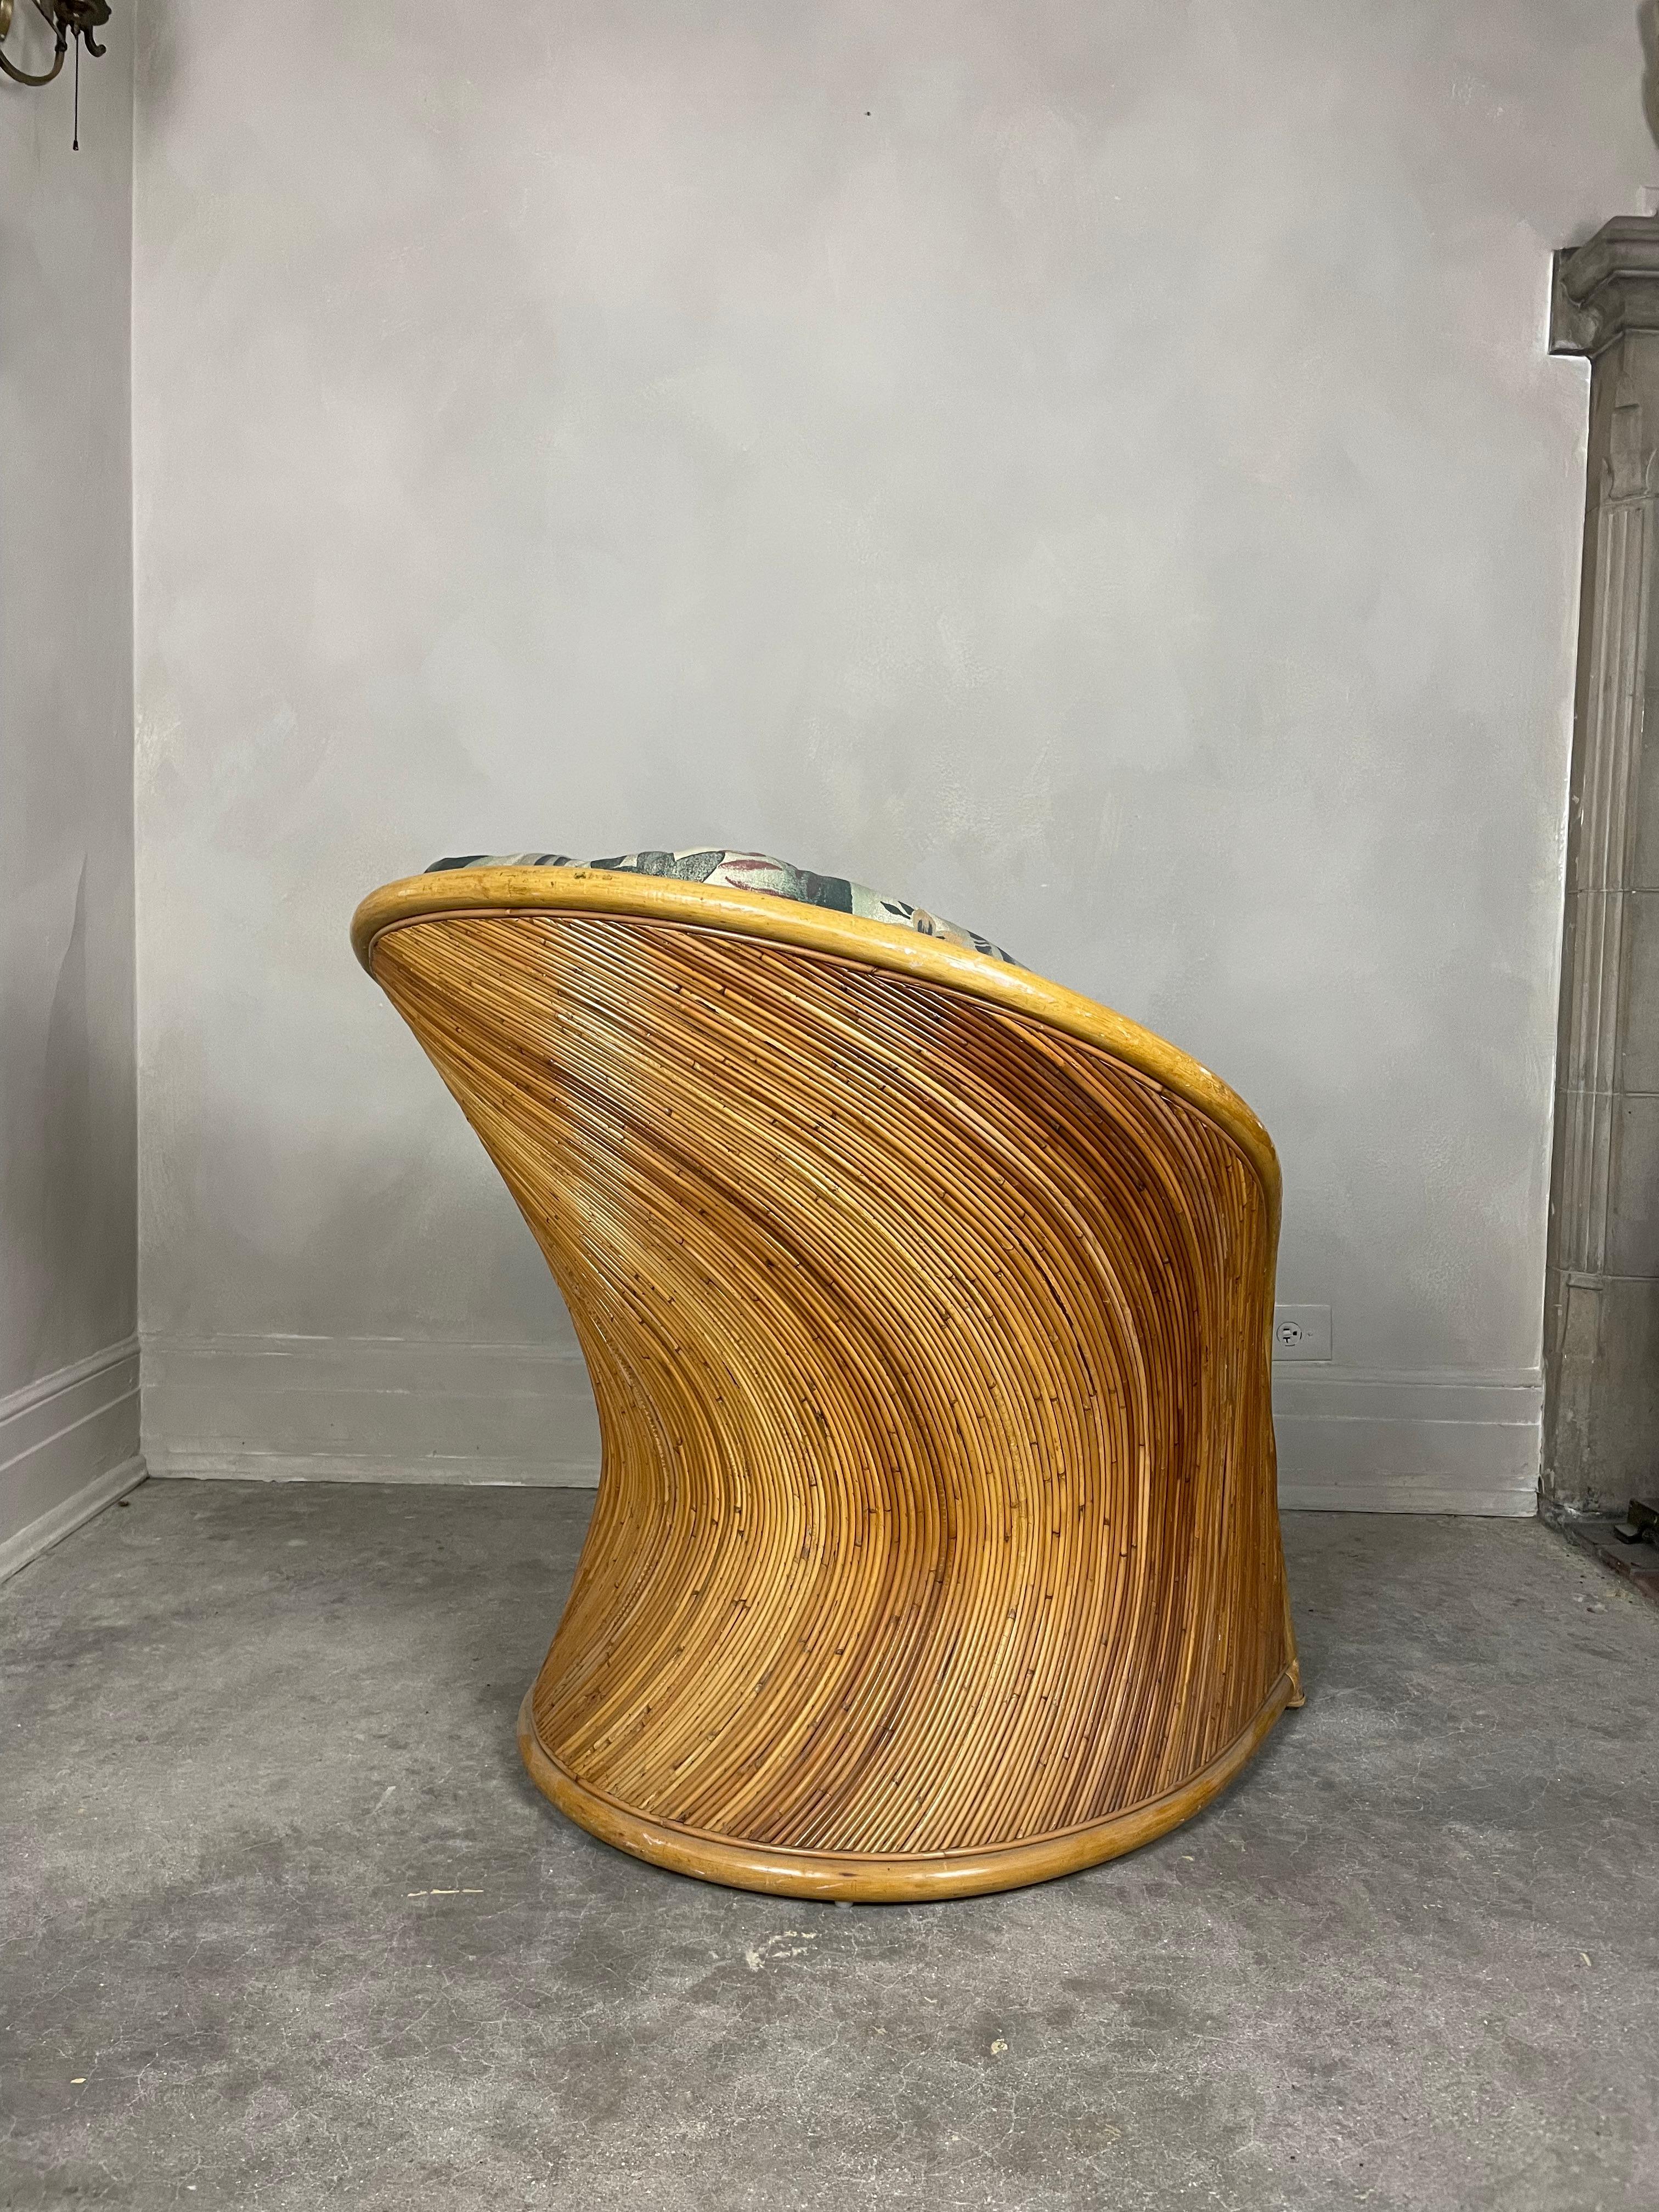 Gorgeous Pencil Reed chair attributed to Adrian Pearsall and Gabriella Creeps. A unique statement piece that features a curvy silhouette.